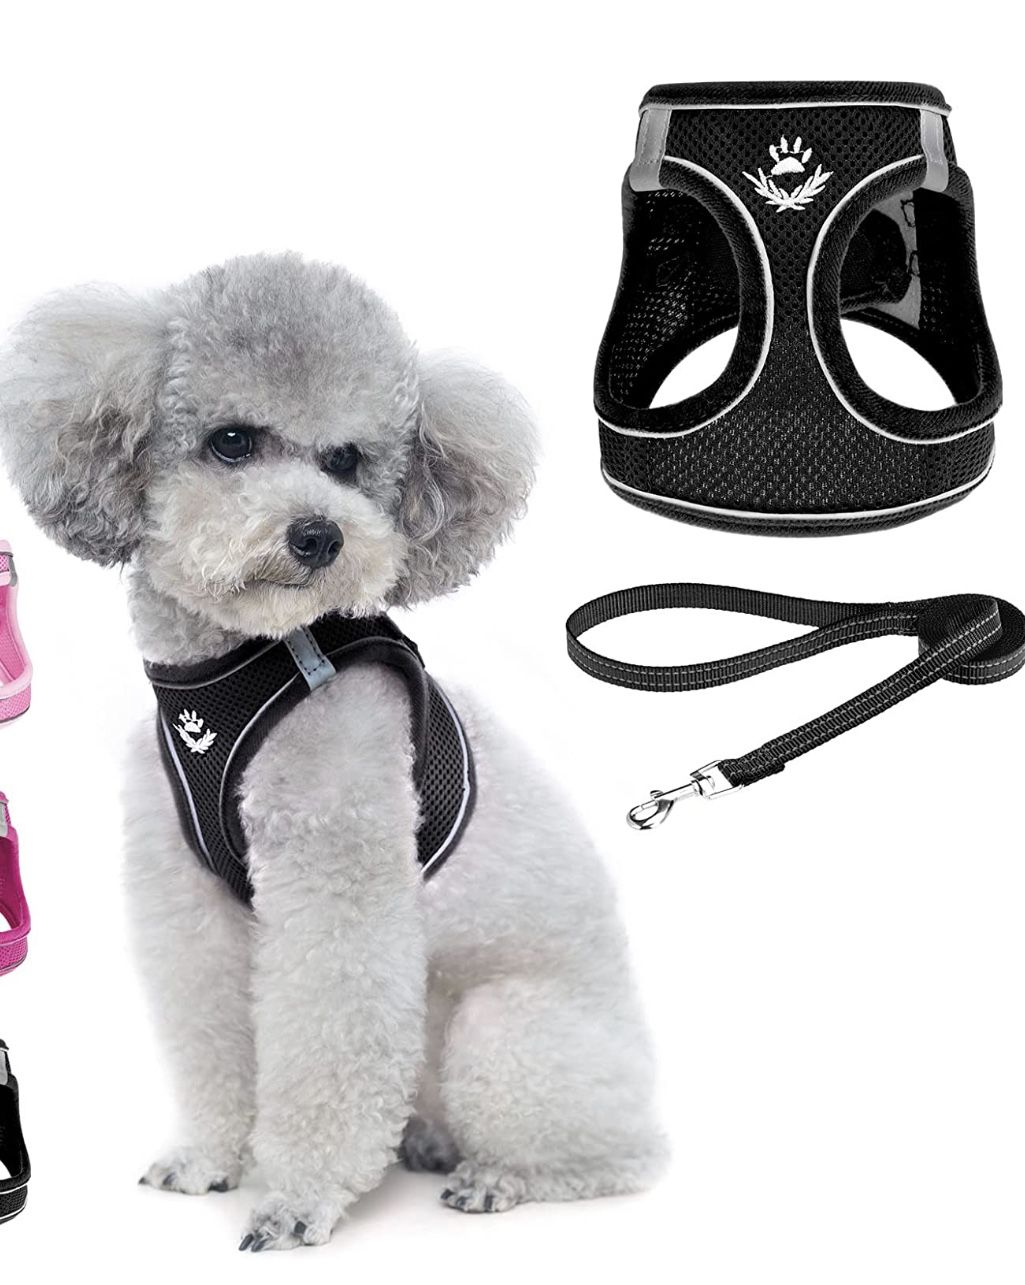 Small Dog Harness and Leash Set,Step in No Chock No Pull Soft Mesh Dog Harnesses Reflective for Extra-Small/Small Medium Puppy Dogs and Cats, Plaid Do